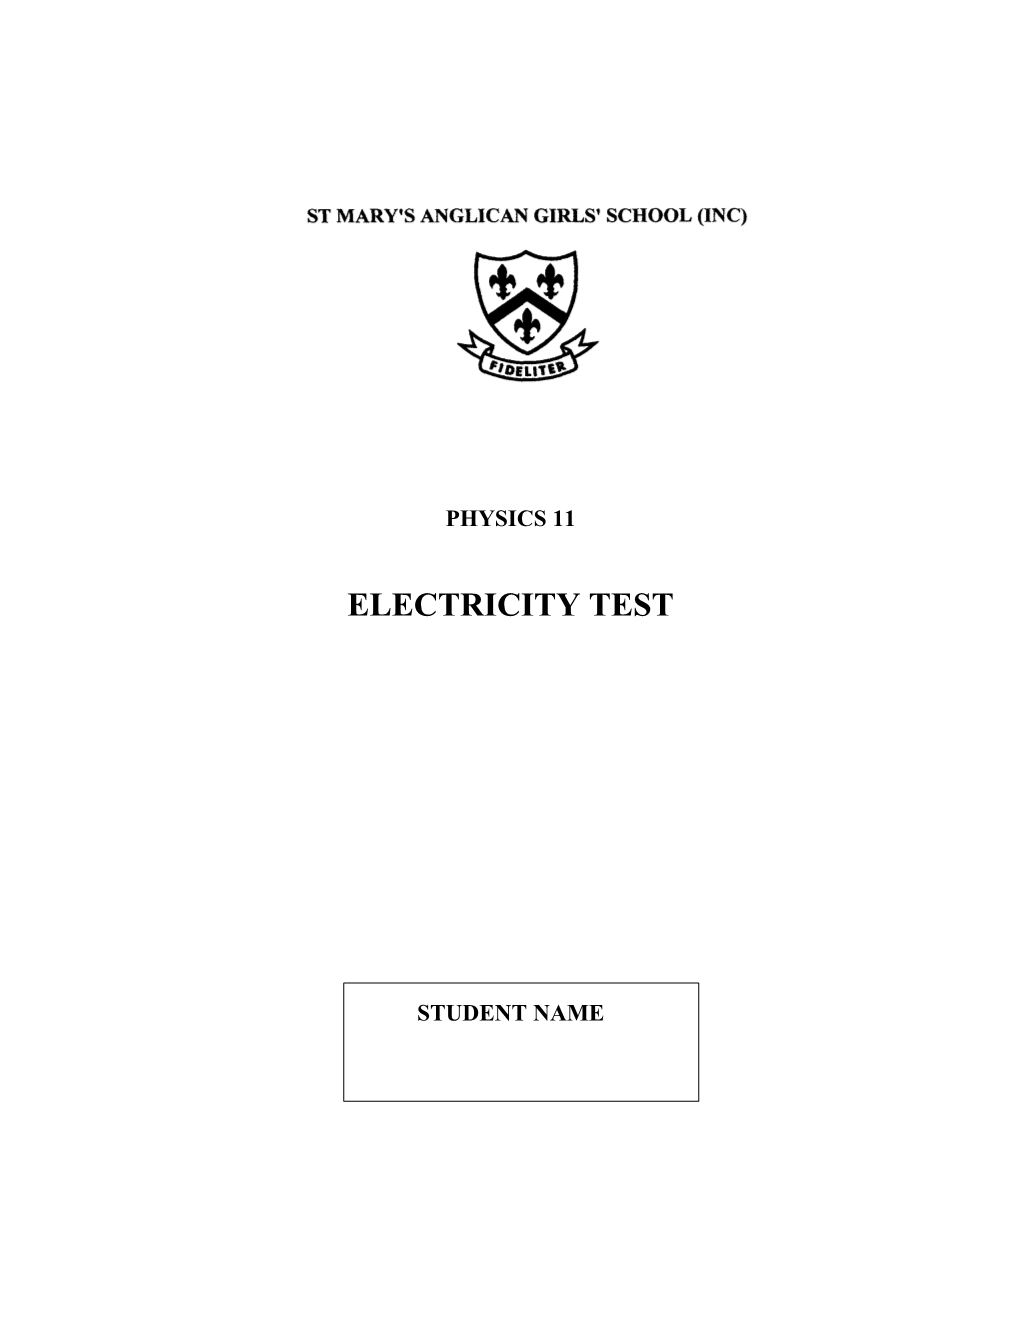 Electricity Test